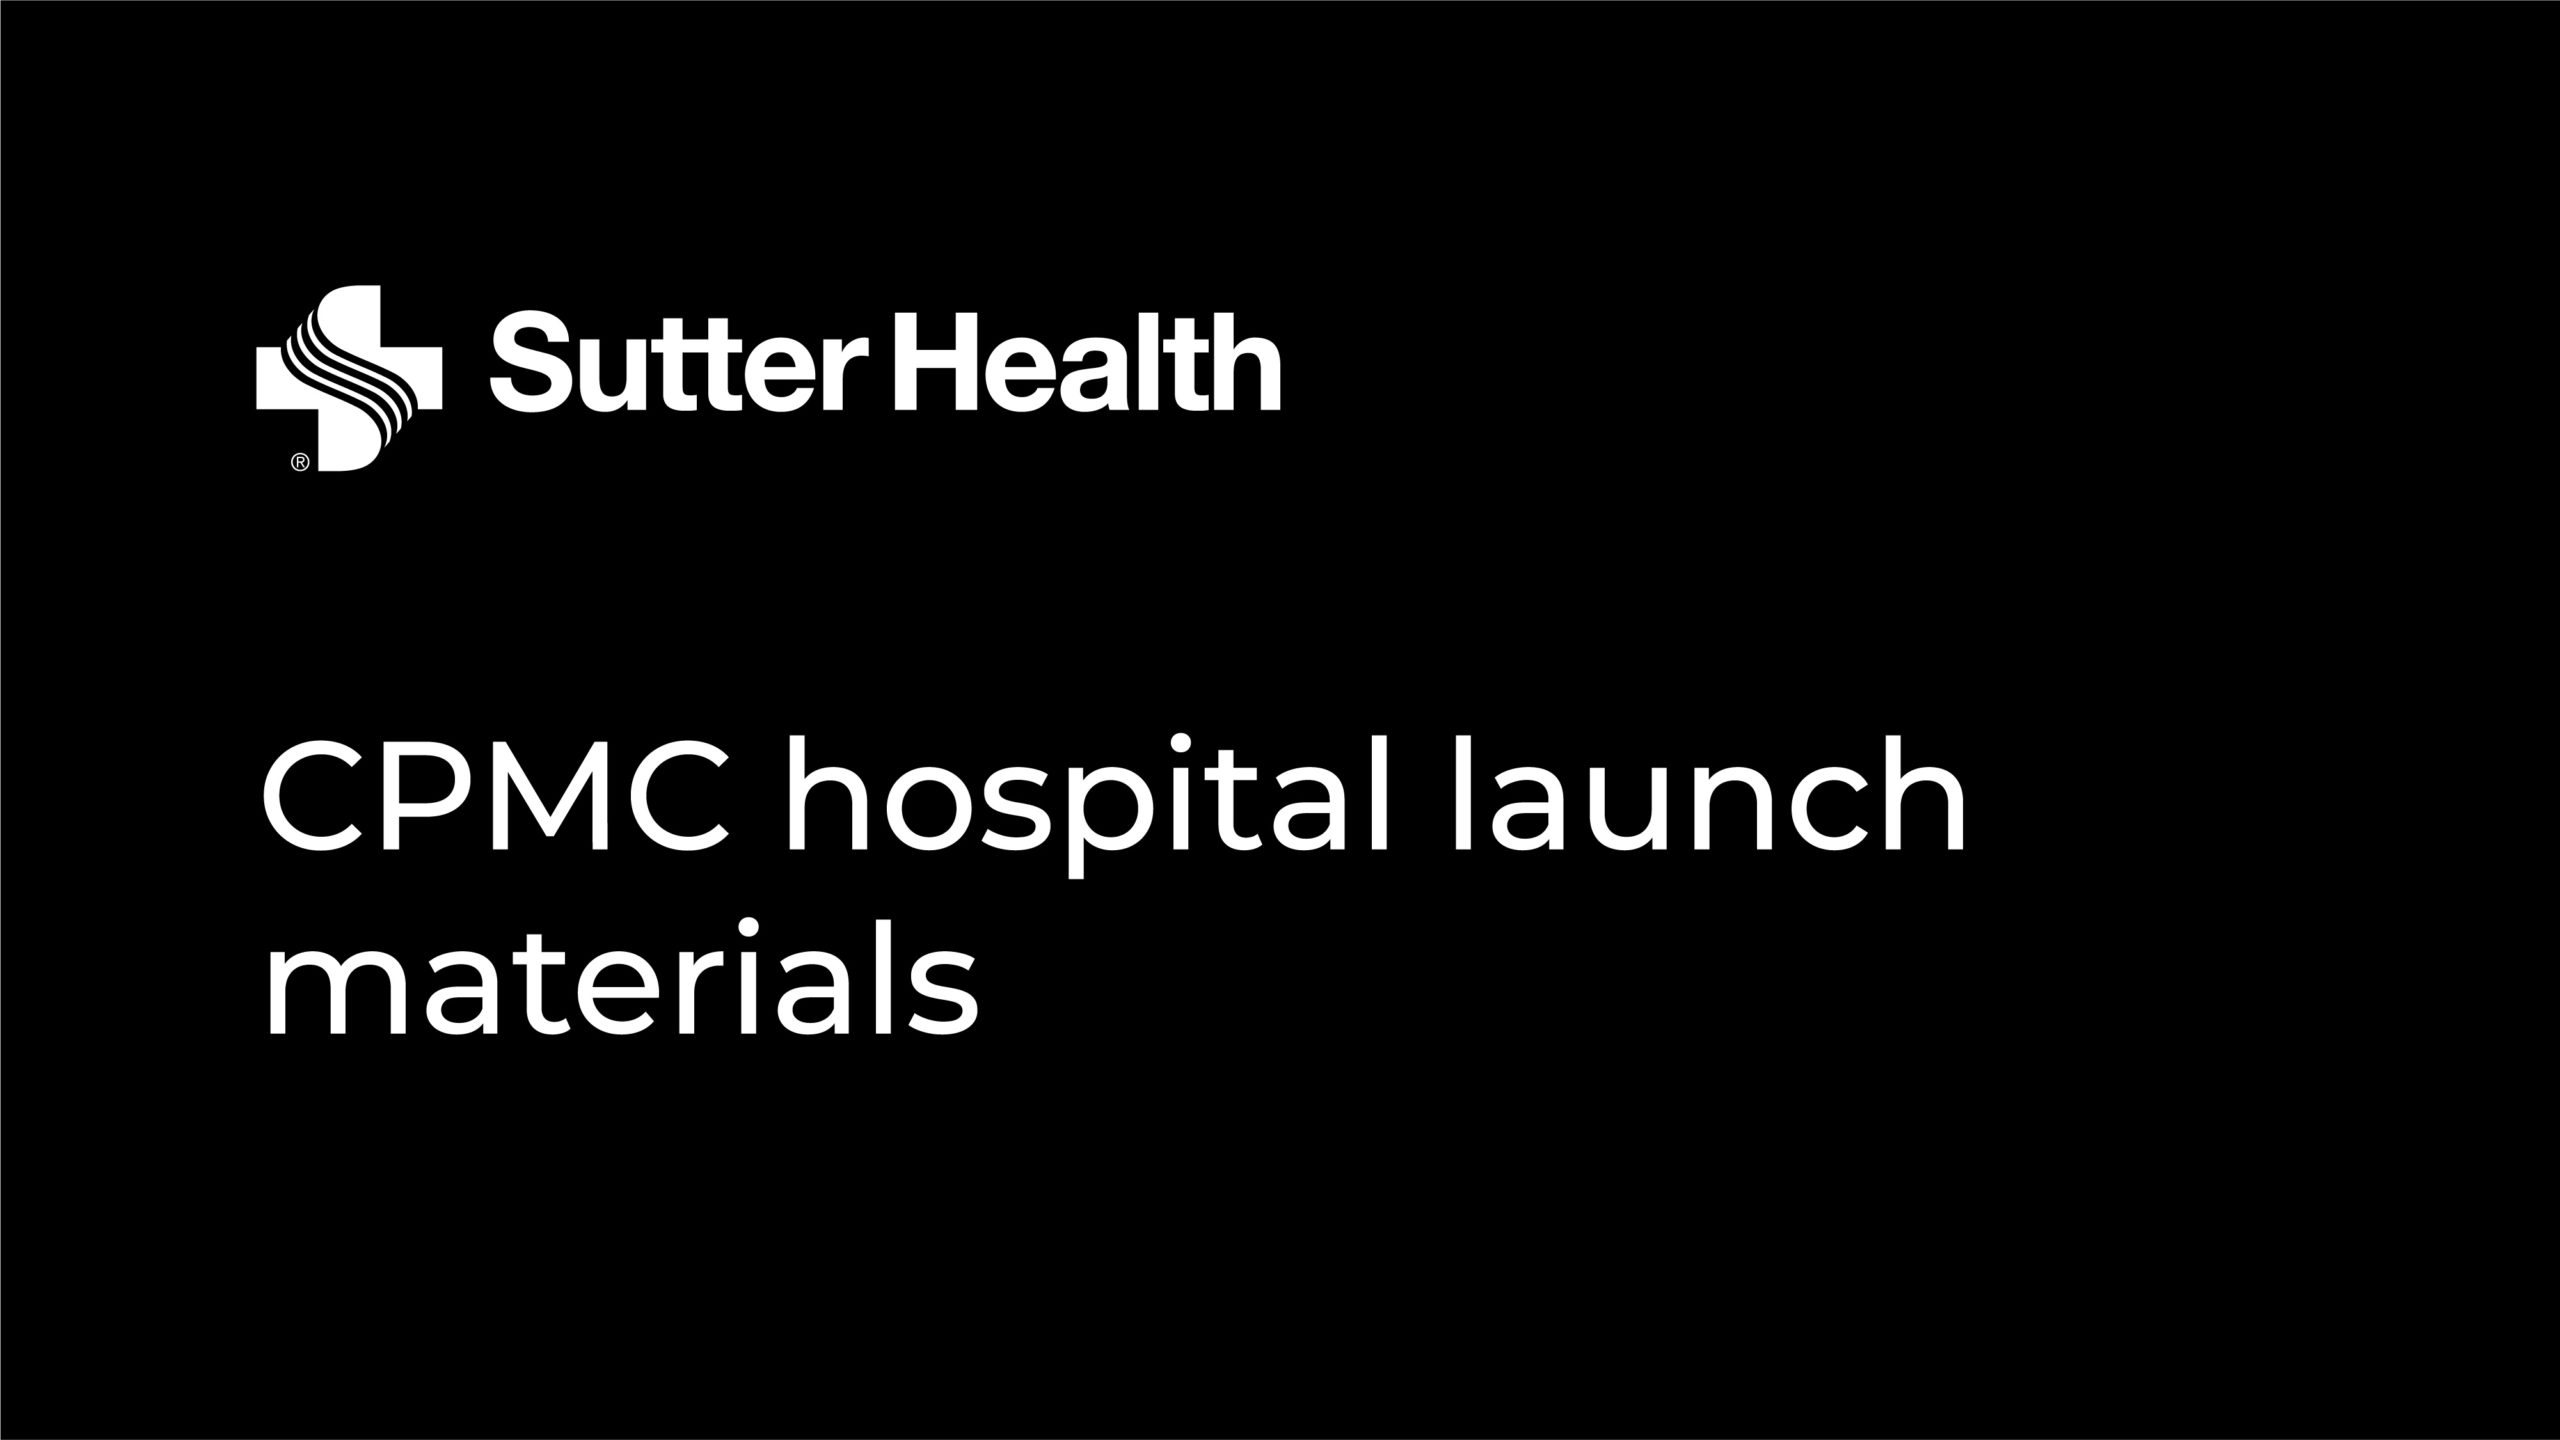 CPMC hospital launch materials